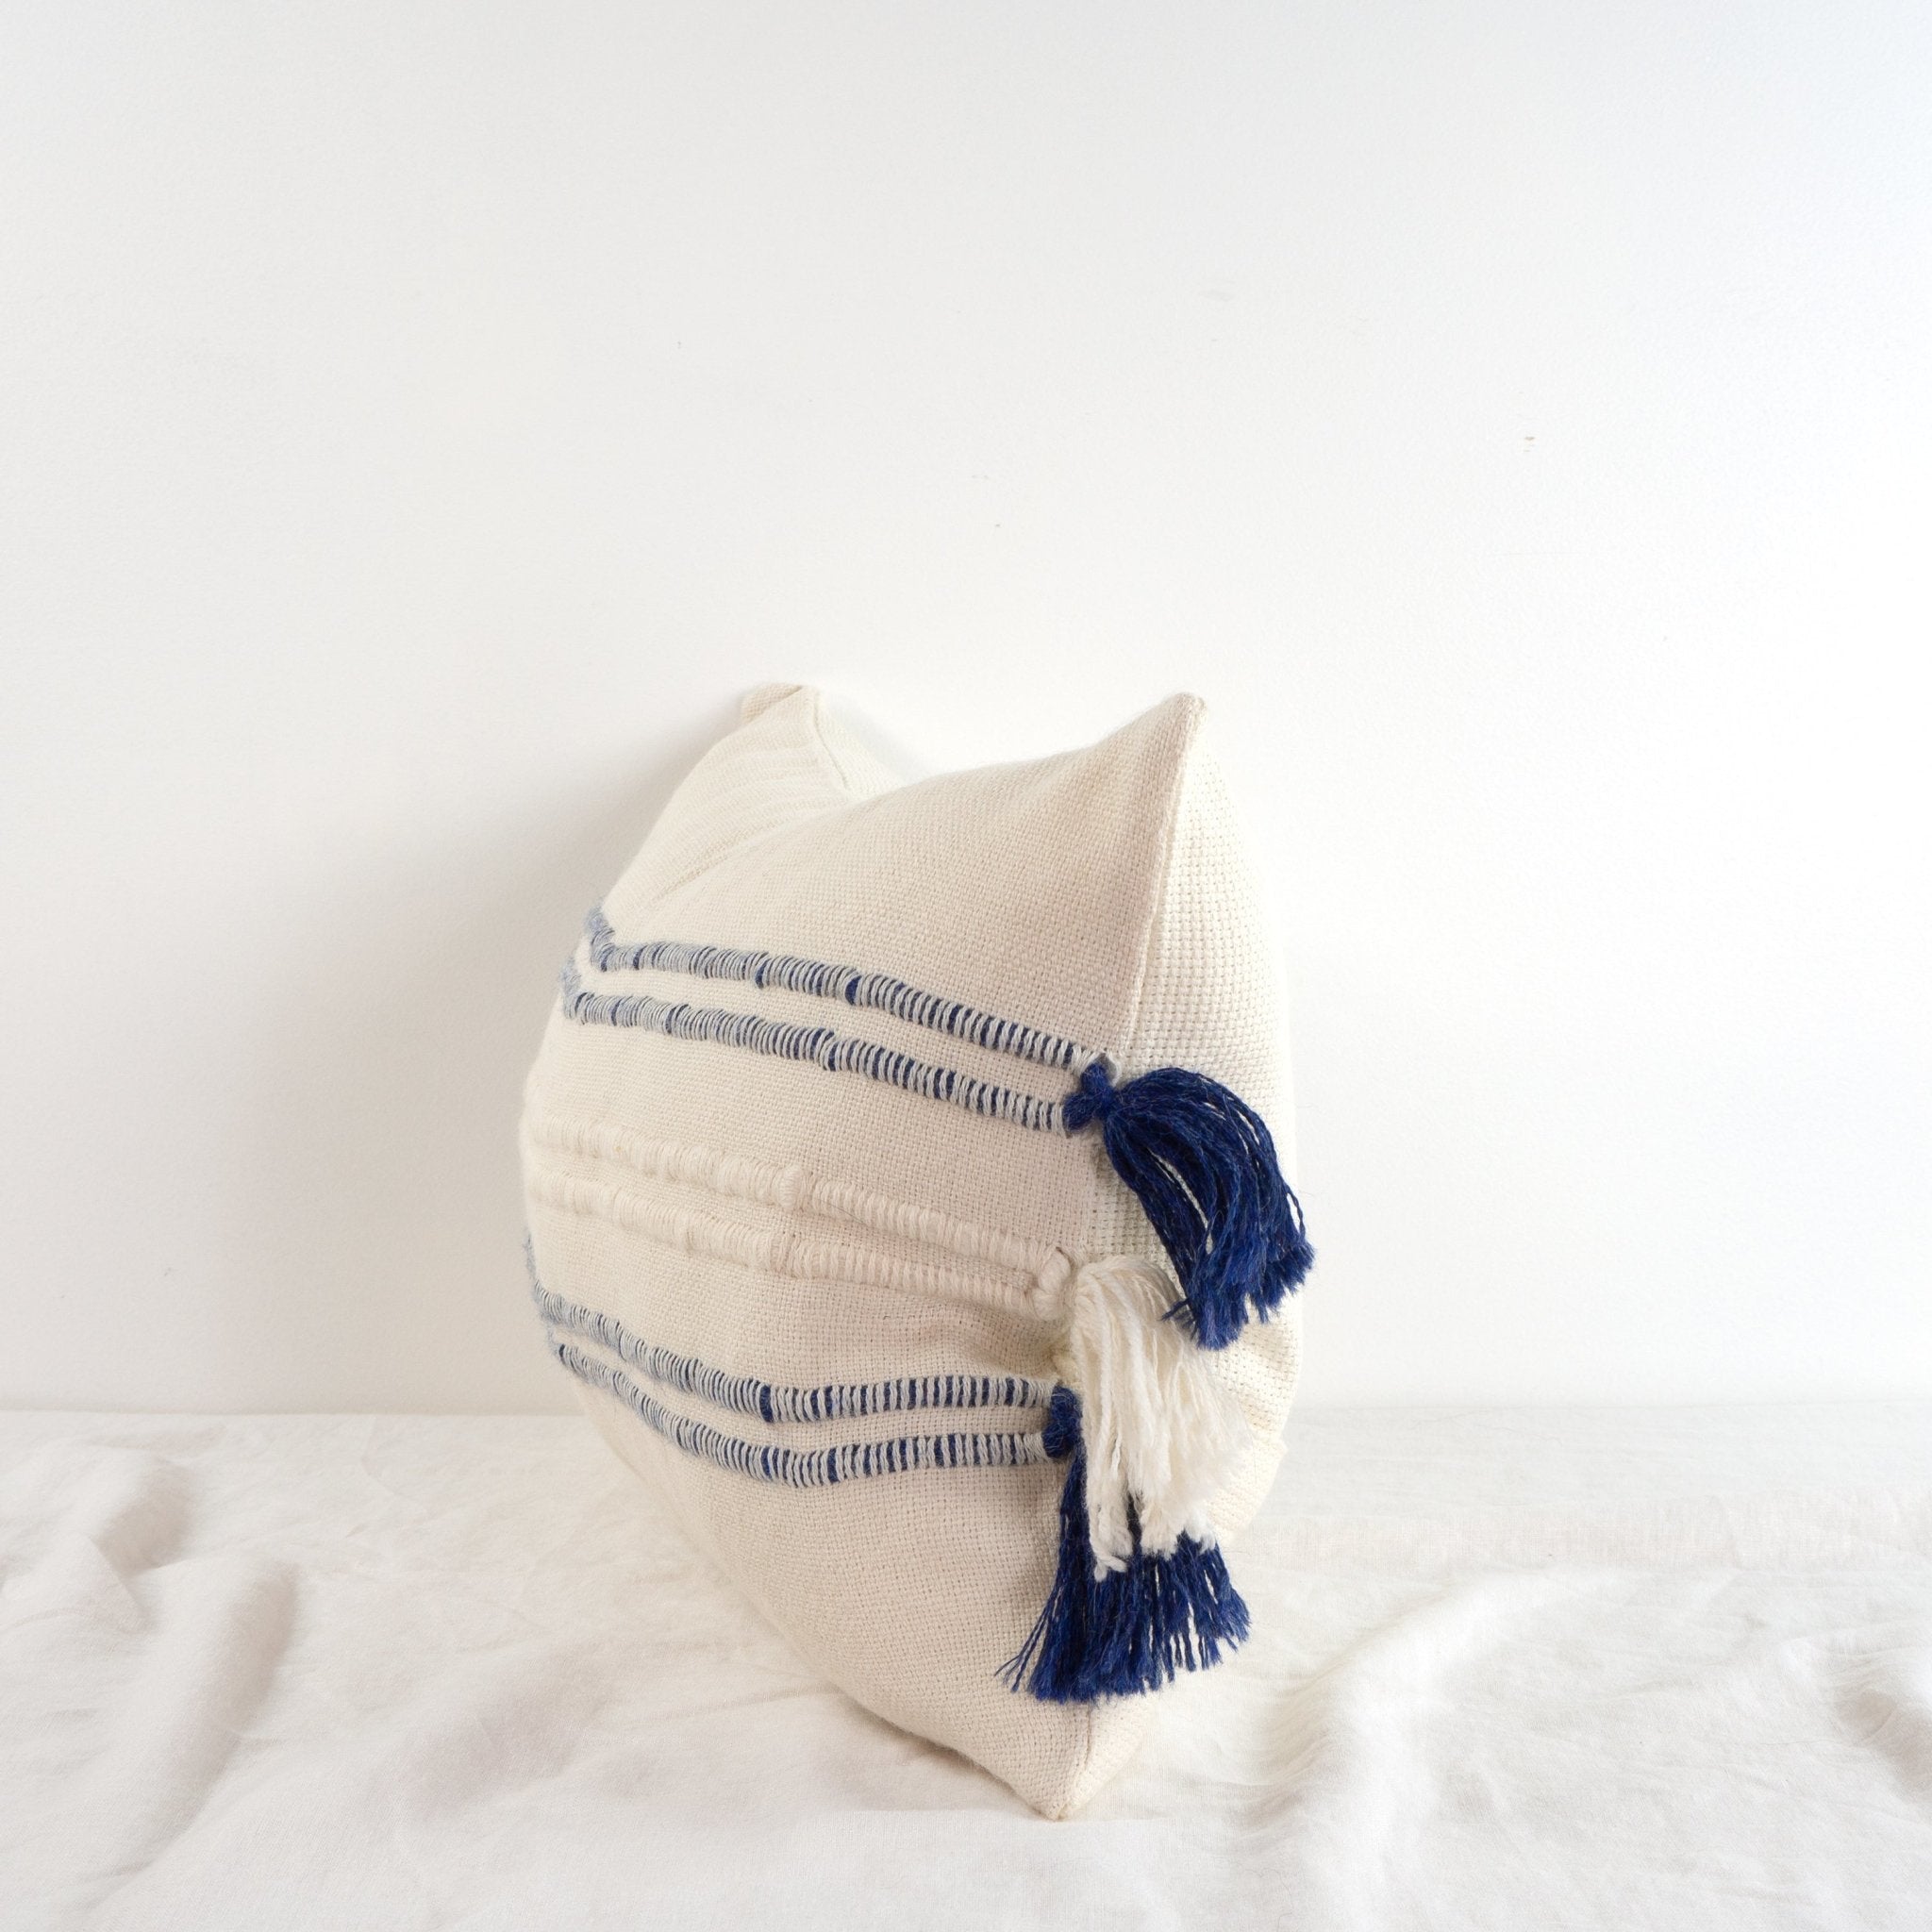 Handwoven white and navy blue baby alpaca lumbar cushion from Peru on a table side on